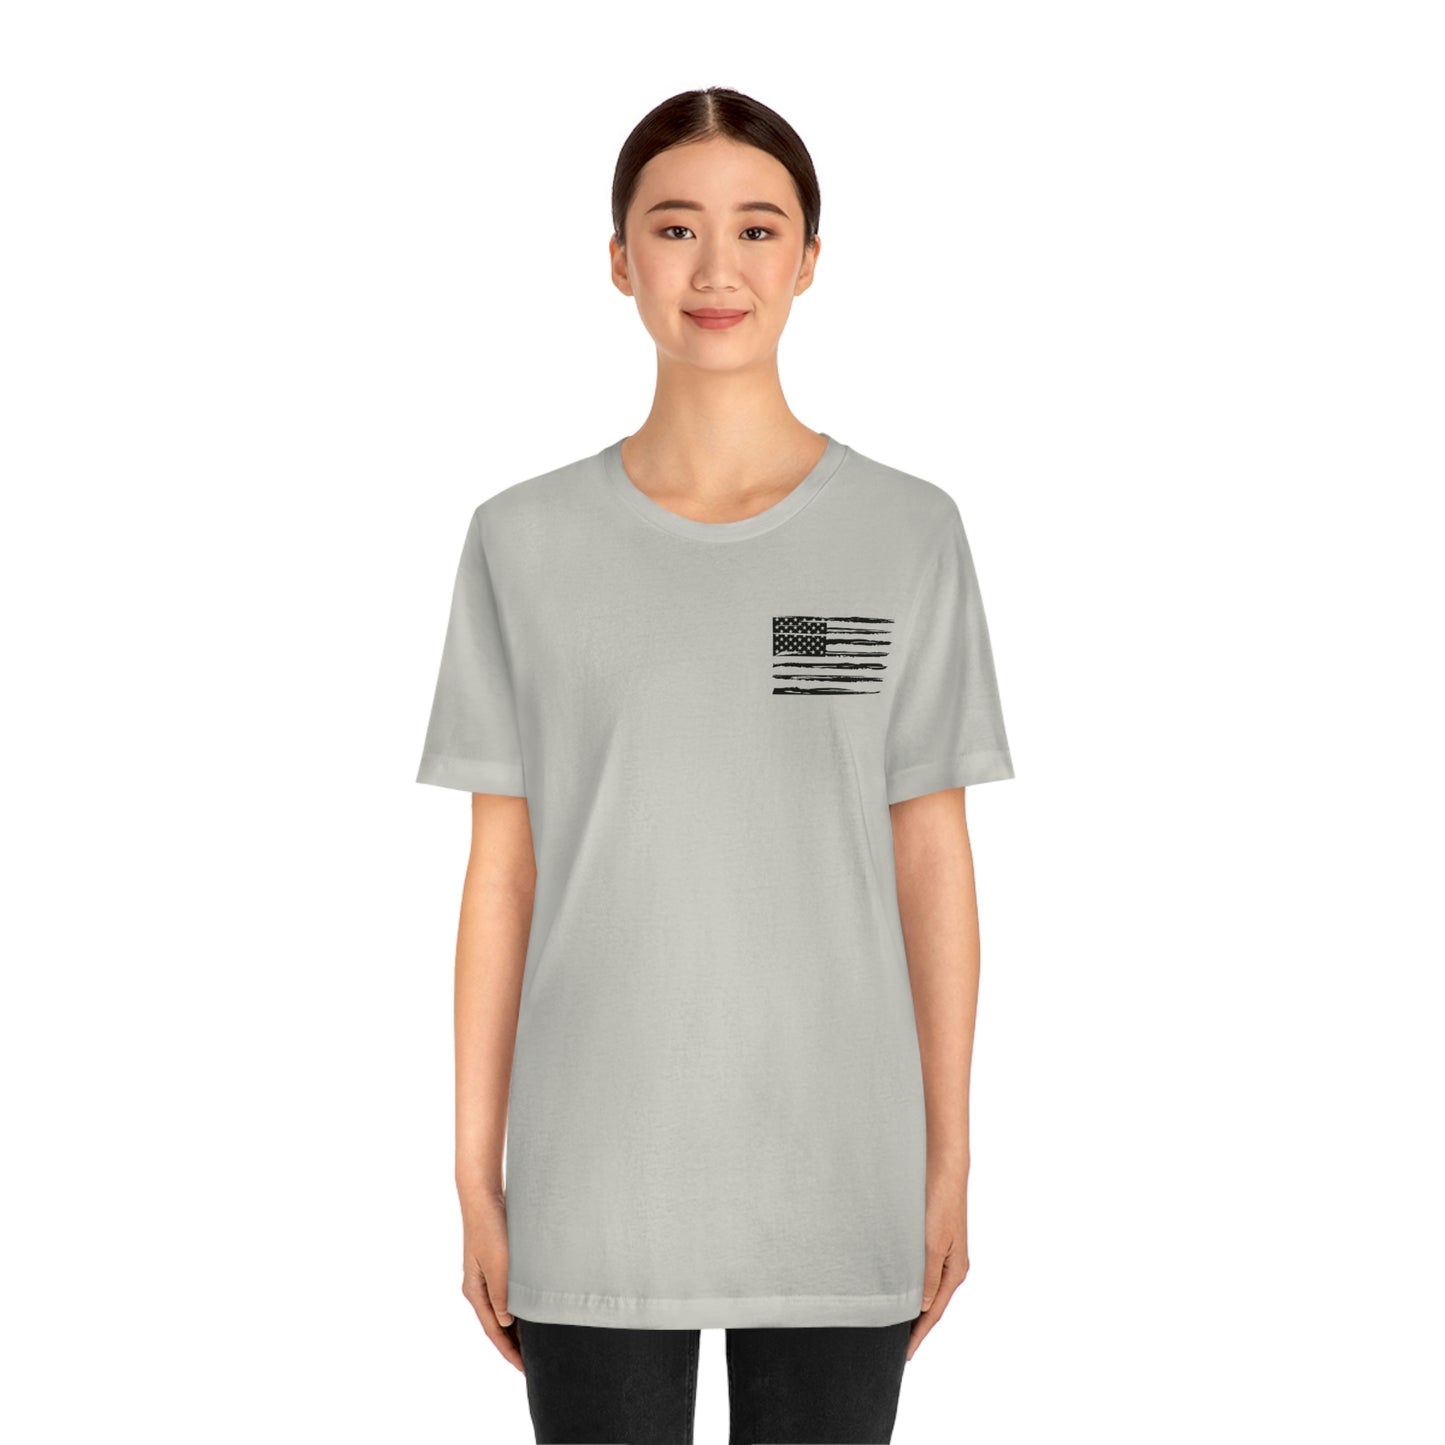 Unisex Jersey Short Sleeve Tee: Preamble to the US Constitution:  America